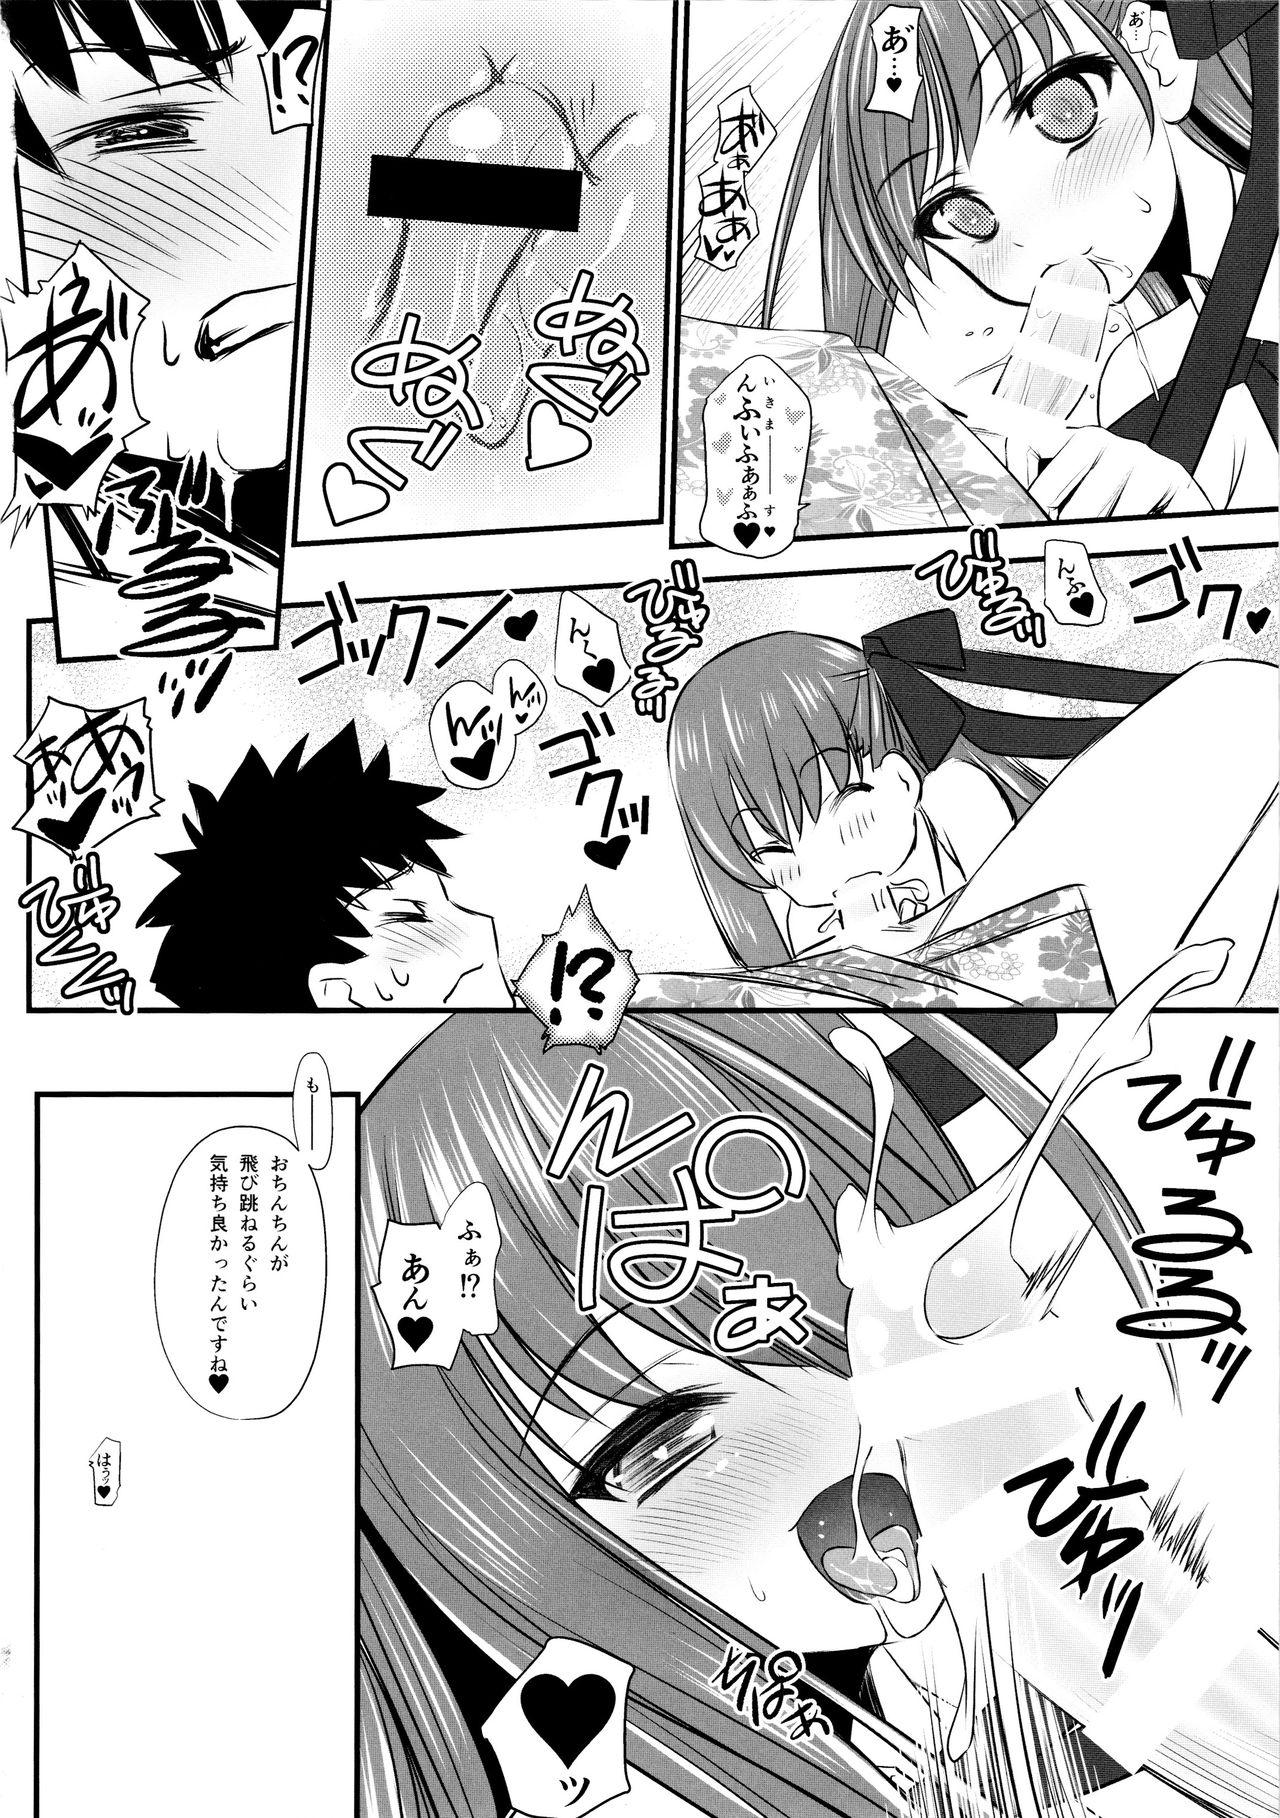 Sentones (C96) [Yakan Honpo (Inoue Tommy)] Queen [Kyuuin] BB-chan (Fate/Grand Order) - Fate grand order Hard Fucking - Page 6